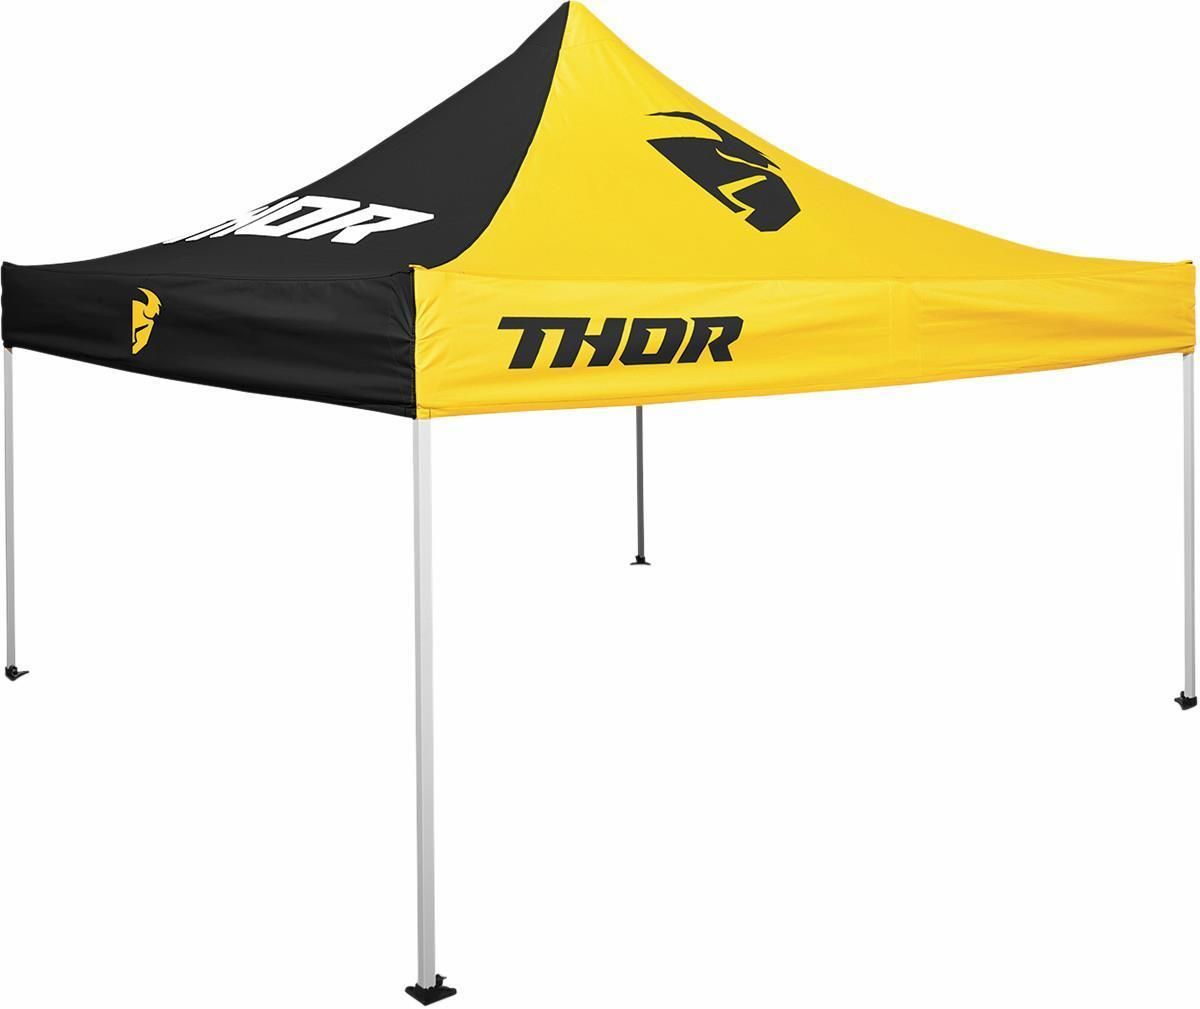 2ZCQ-THOR-40300027 Replacement Track Canopy - Black/Yellow